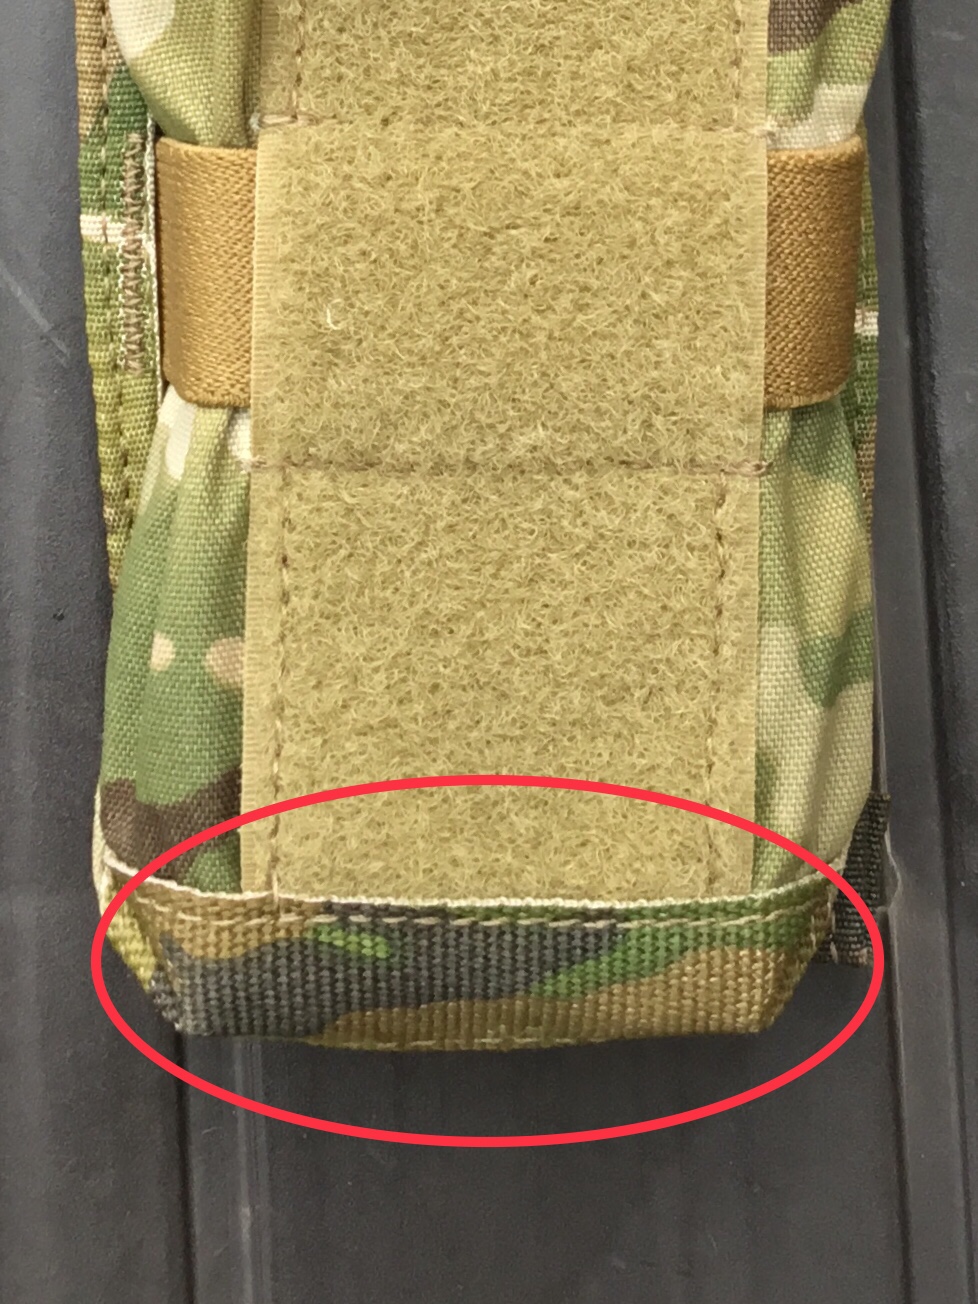 REVIEW: Crye Precision 330D 556 Double Mag Pouch – The Reptile House